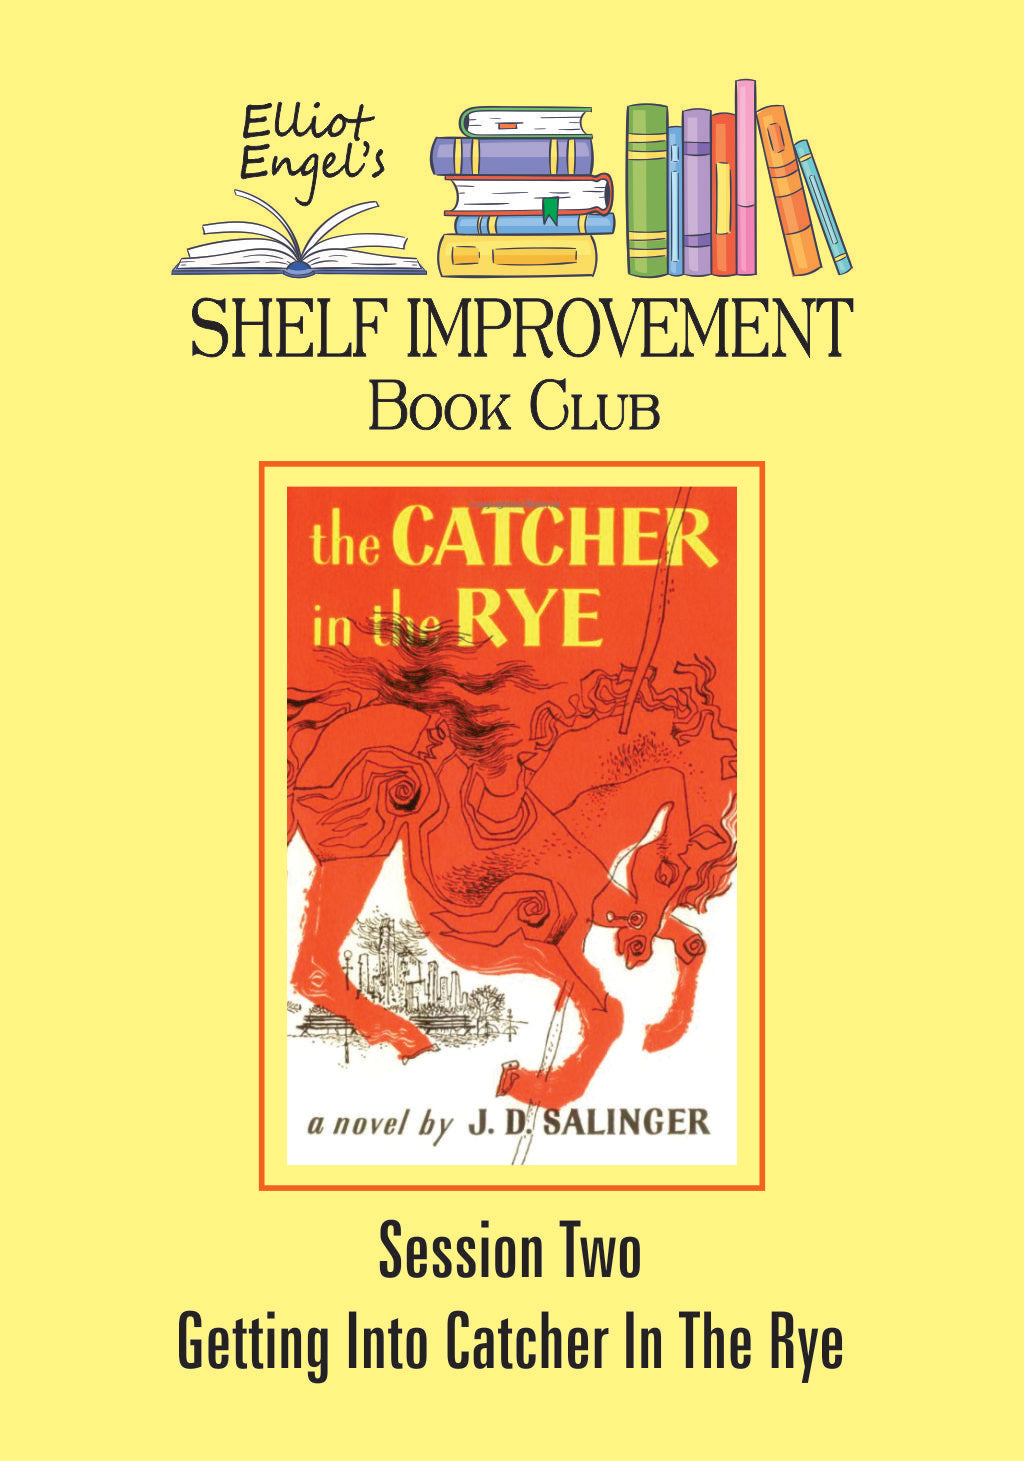 Shelf Improvement Book Club Session 2: Getting Into Catcher In The Rye